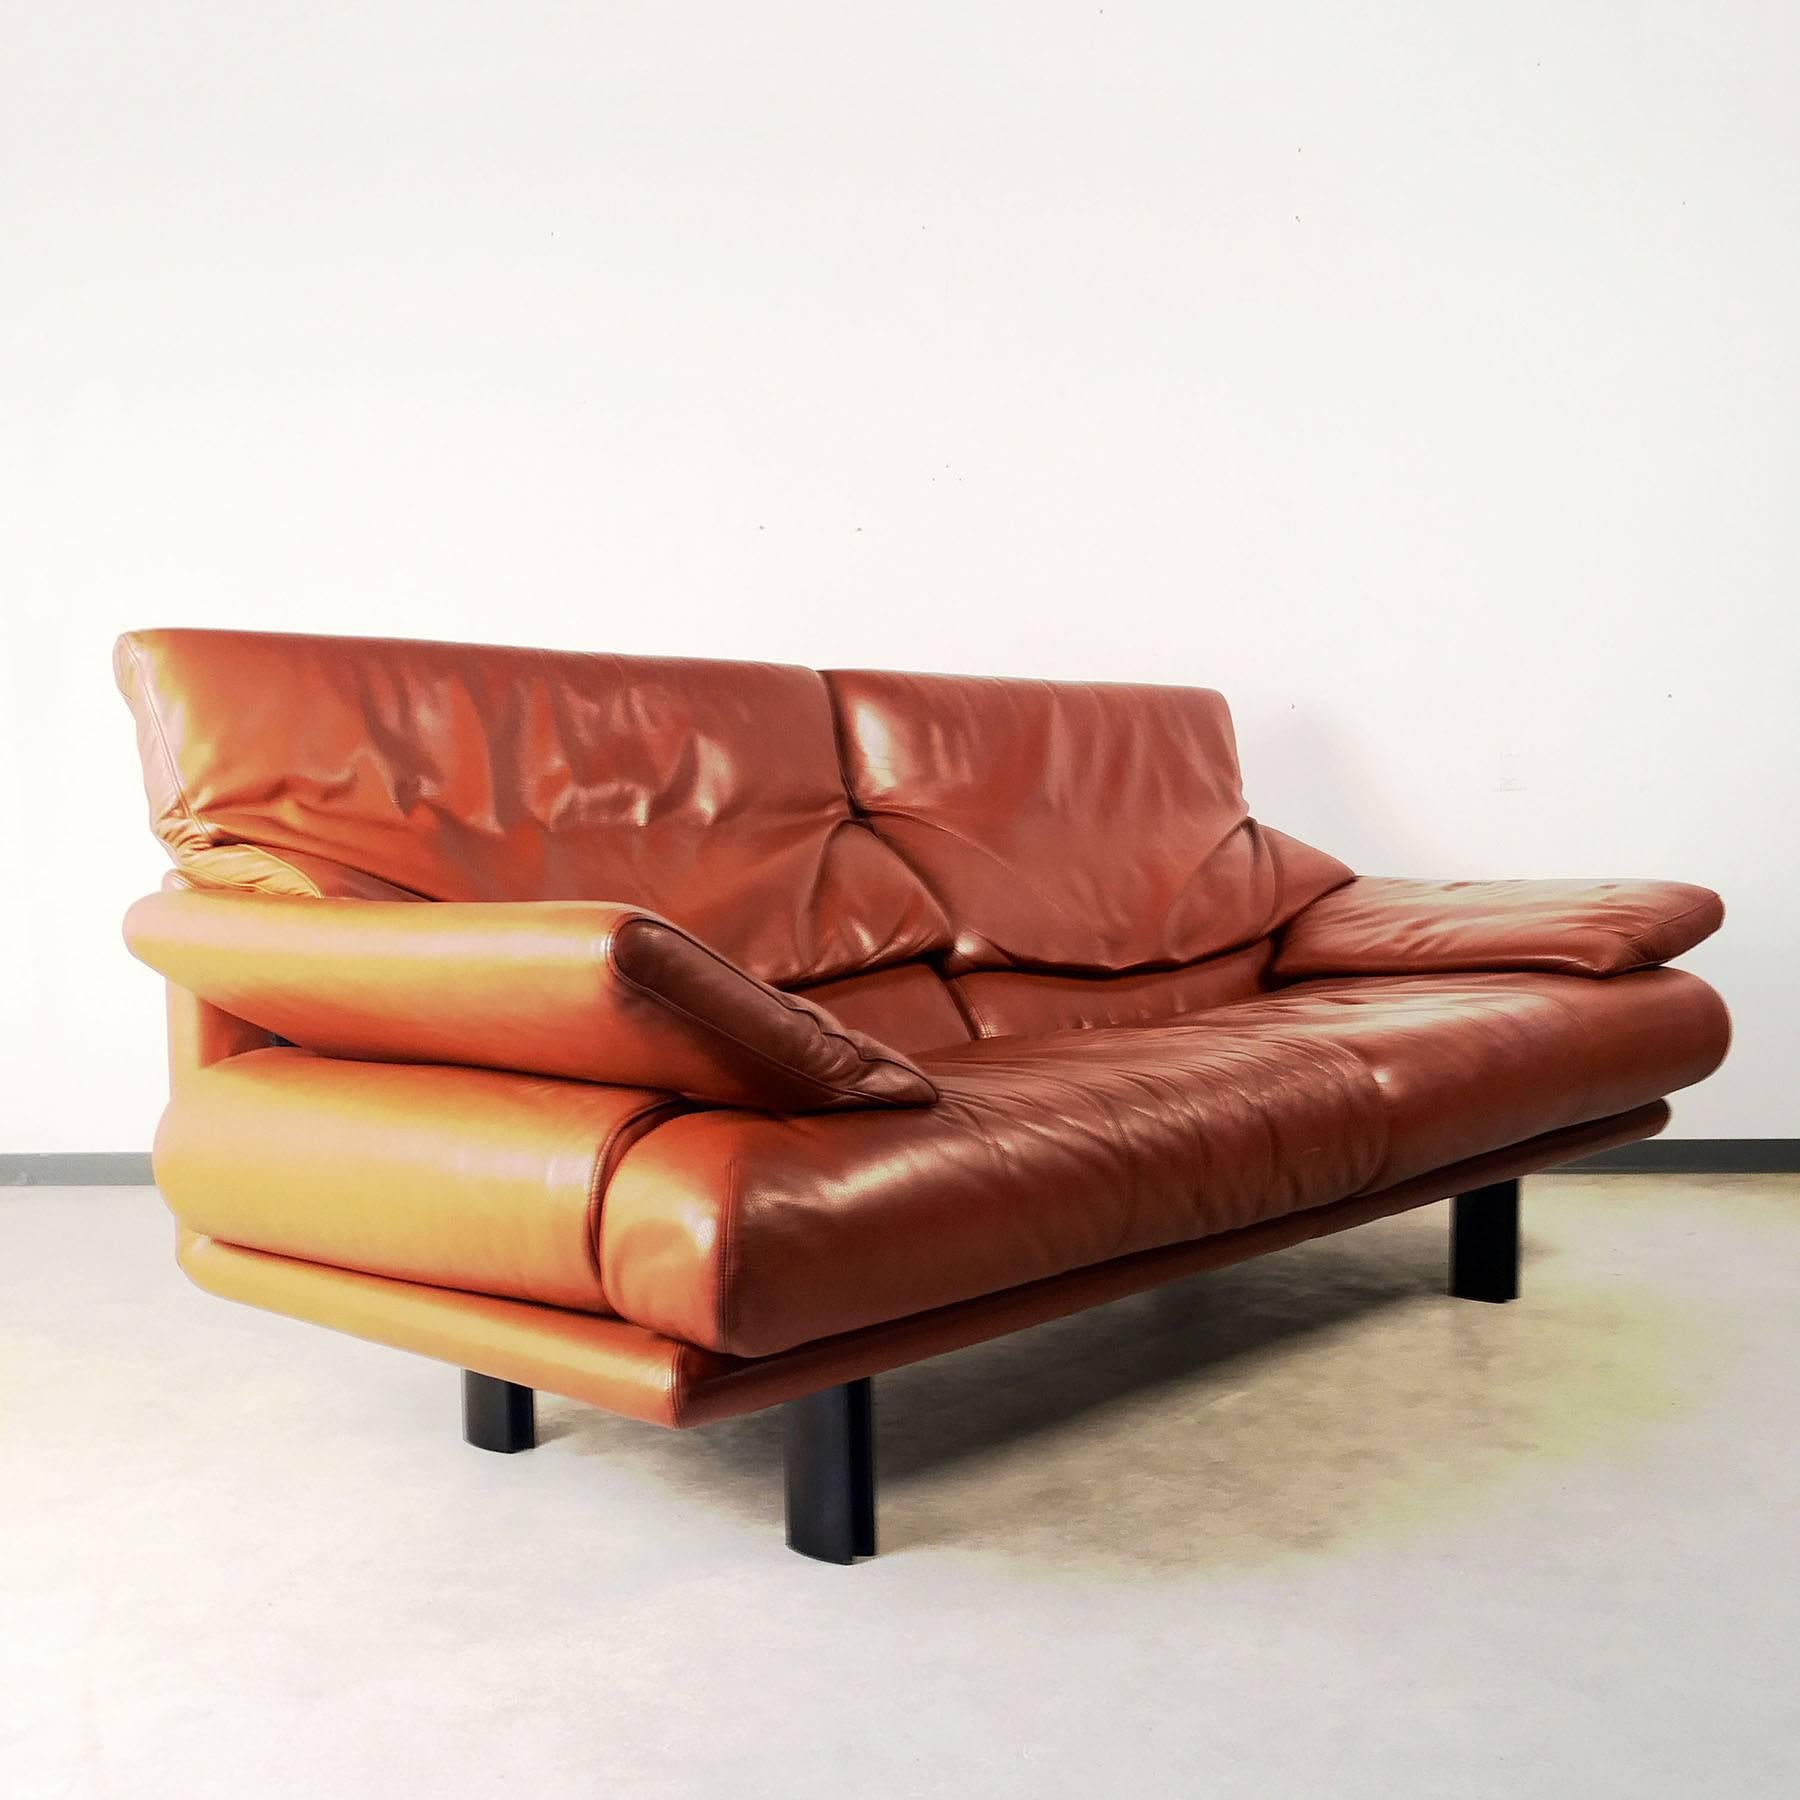 Alanda three-seat sofa, designed in the 1970s by Paolo Piva, manufactured in Italy by B&B Italia. Very high quality piece, beautifully designed and well crafted. Back- and armrests are adjustable, which makes the sofa even more